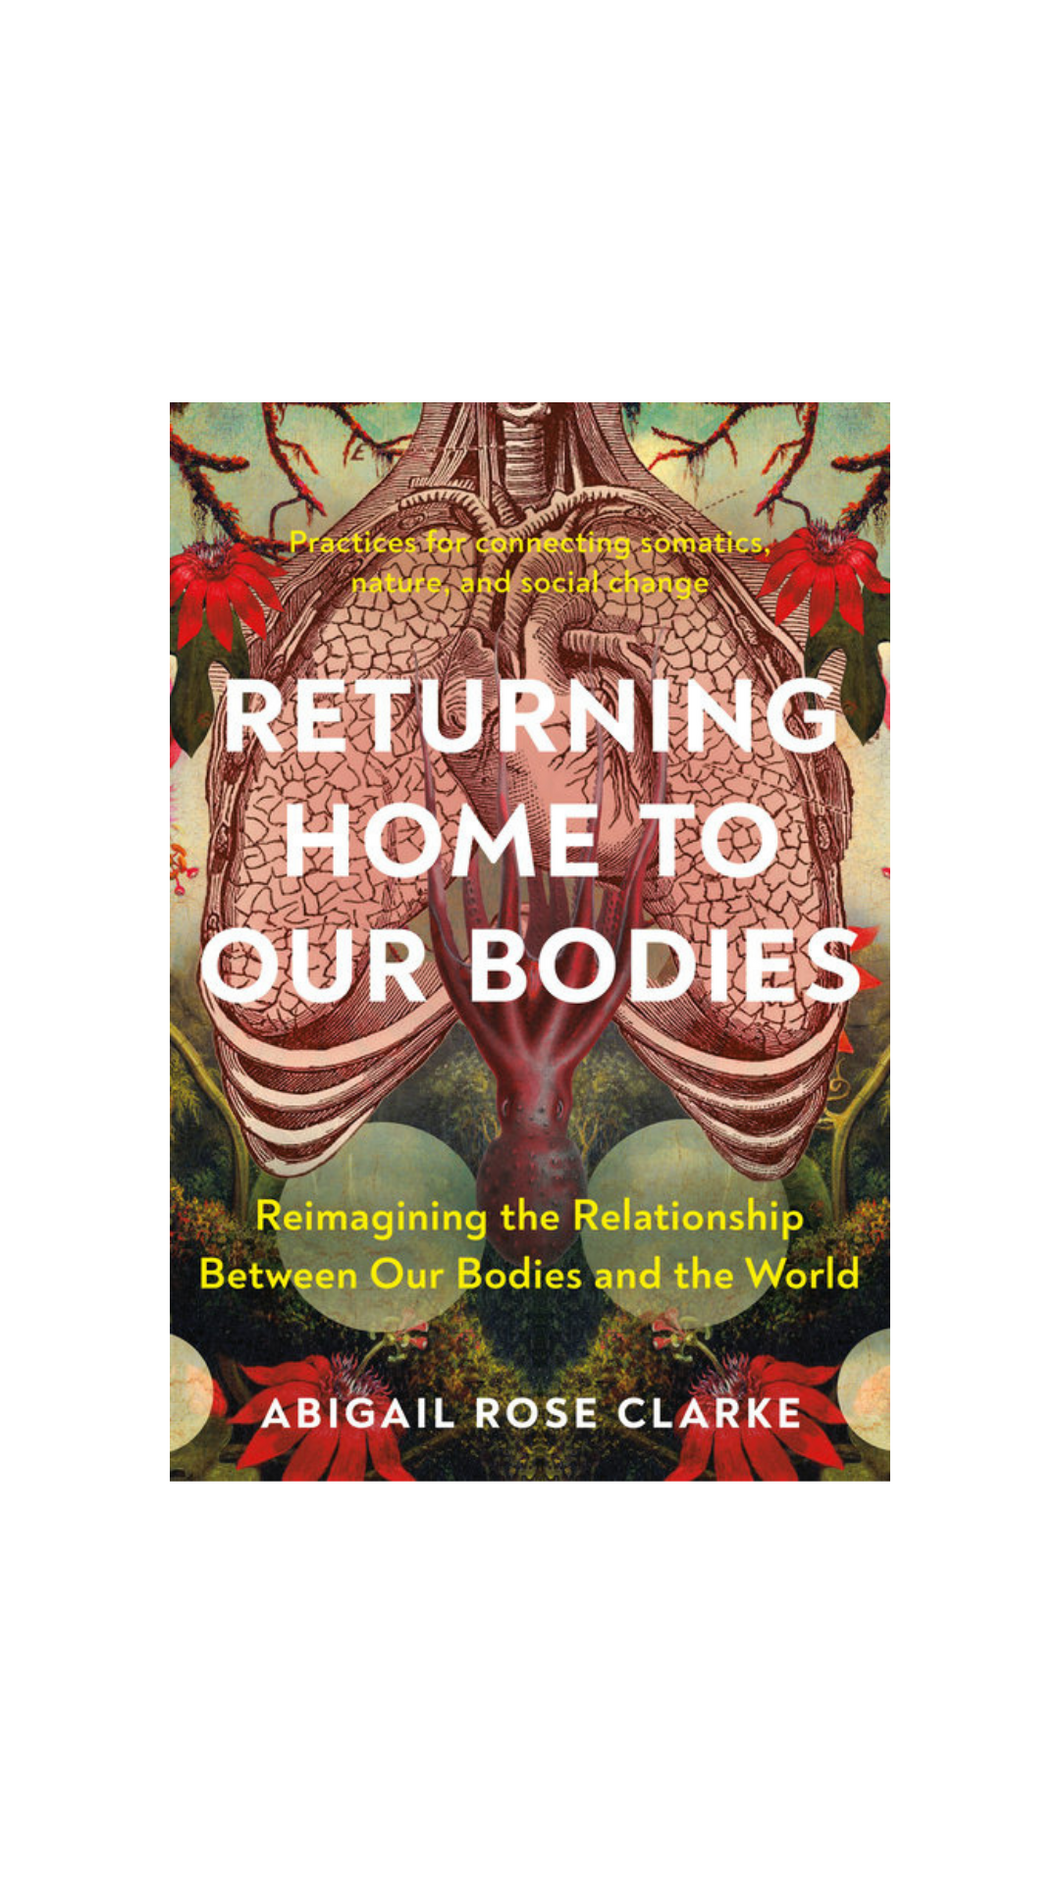 Returning Home to Our Bodies by Abigal Rose Clarke